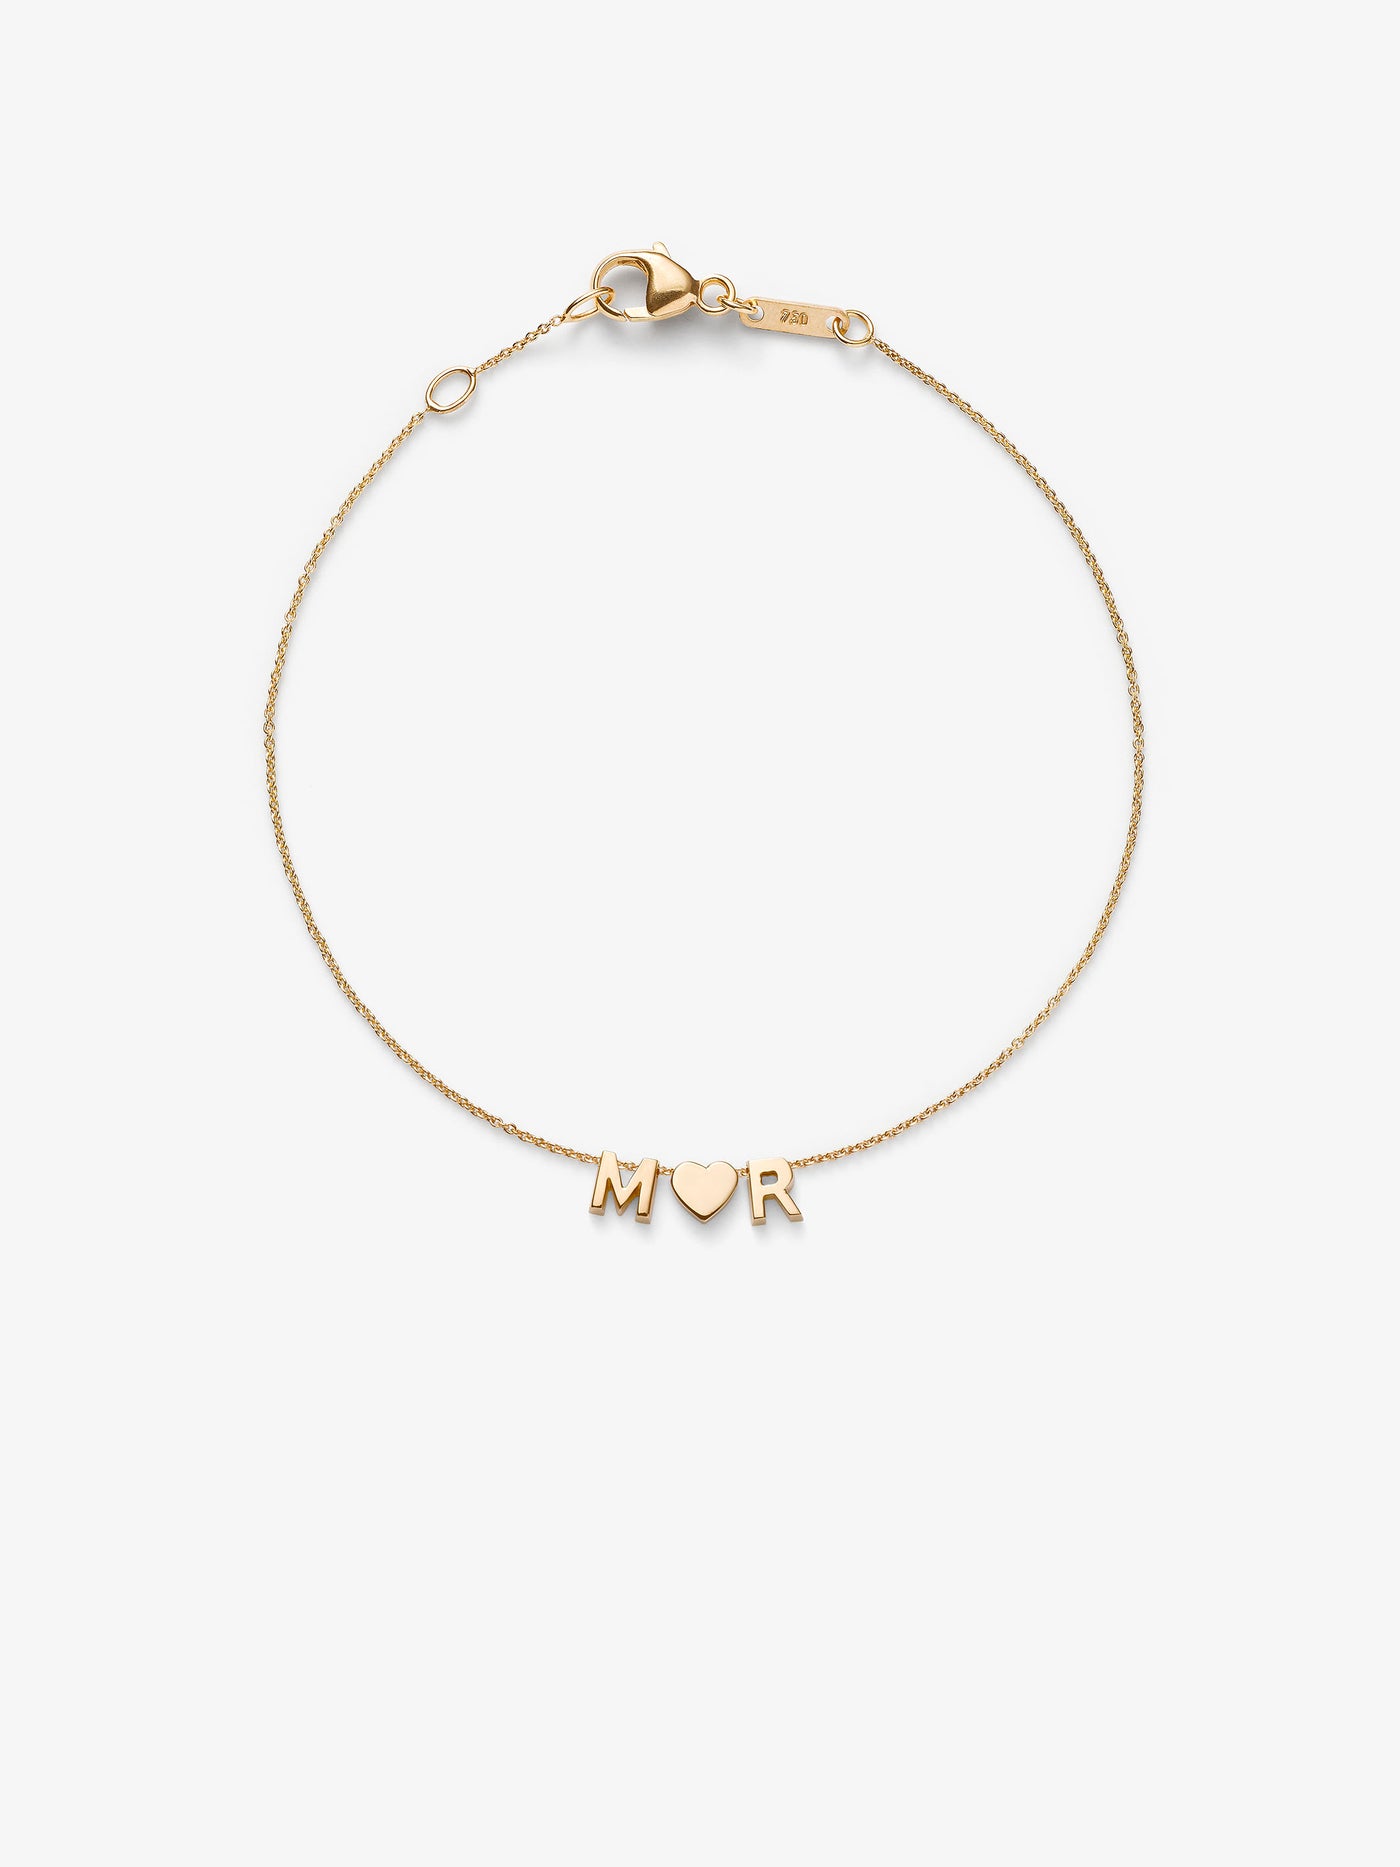 Love Letters Two Letters and Heart bracelet with adjustable chain in 18k solid gold